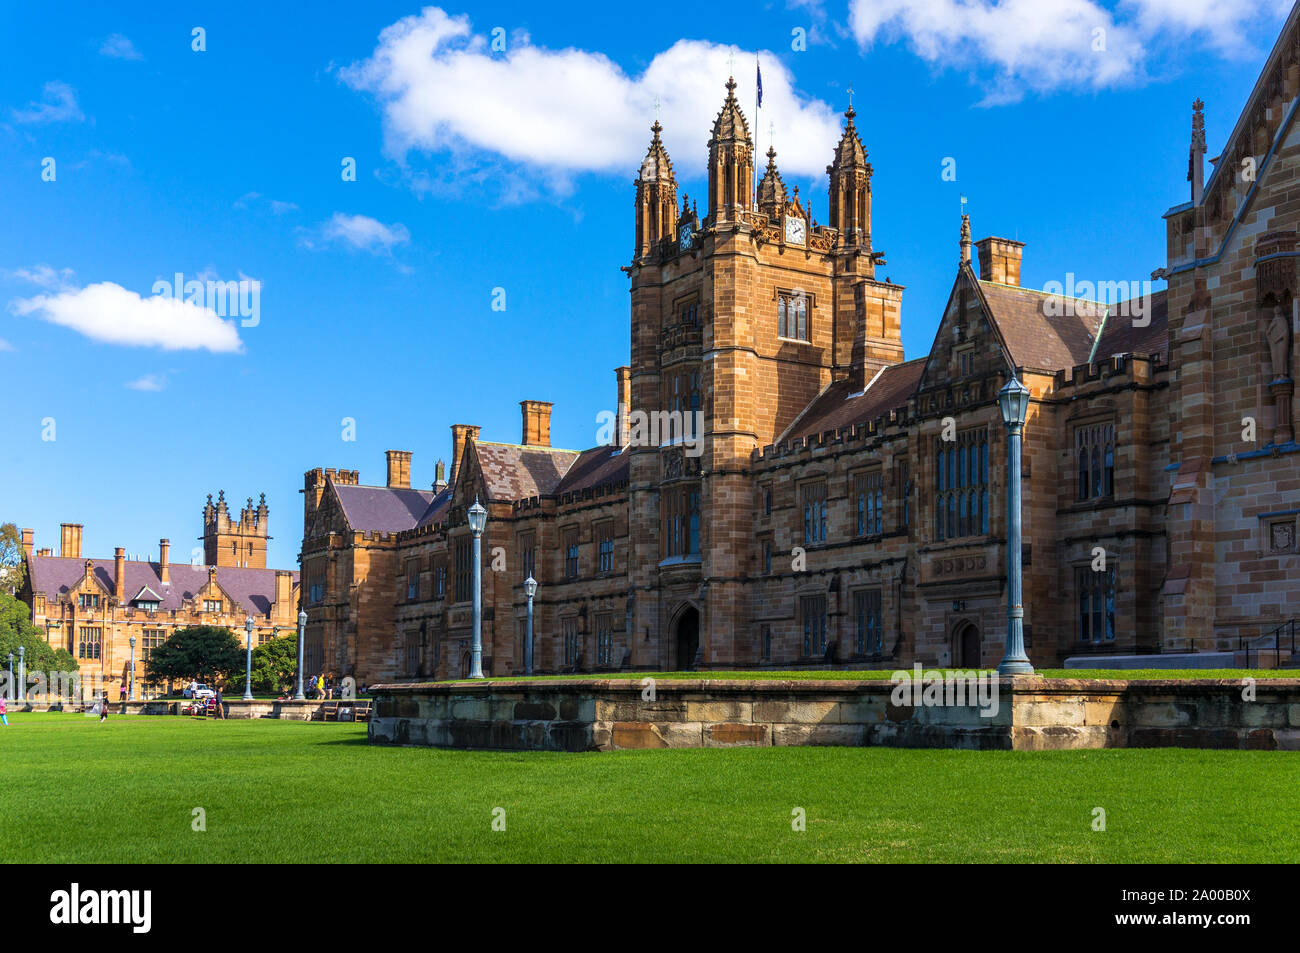 Sydney Uni building facade. University of Sydney against deep blue sky with white clouds, daytime photo Stock Photo